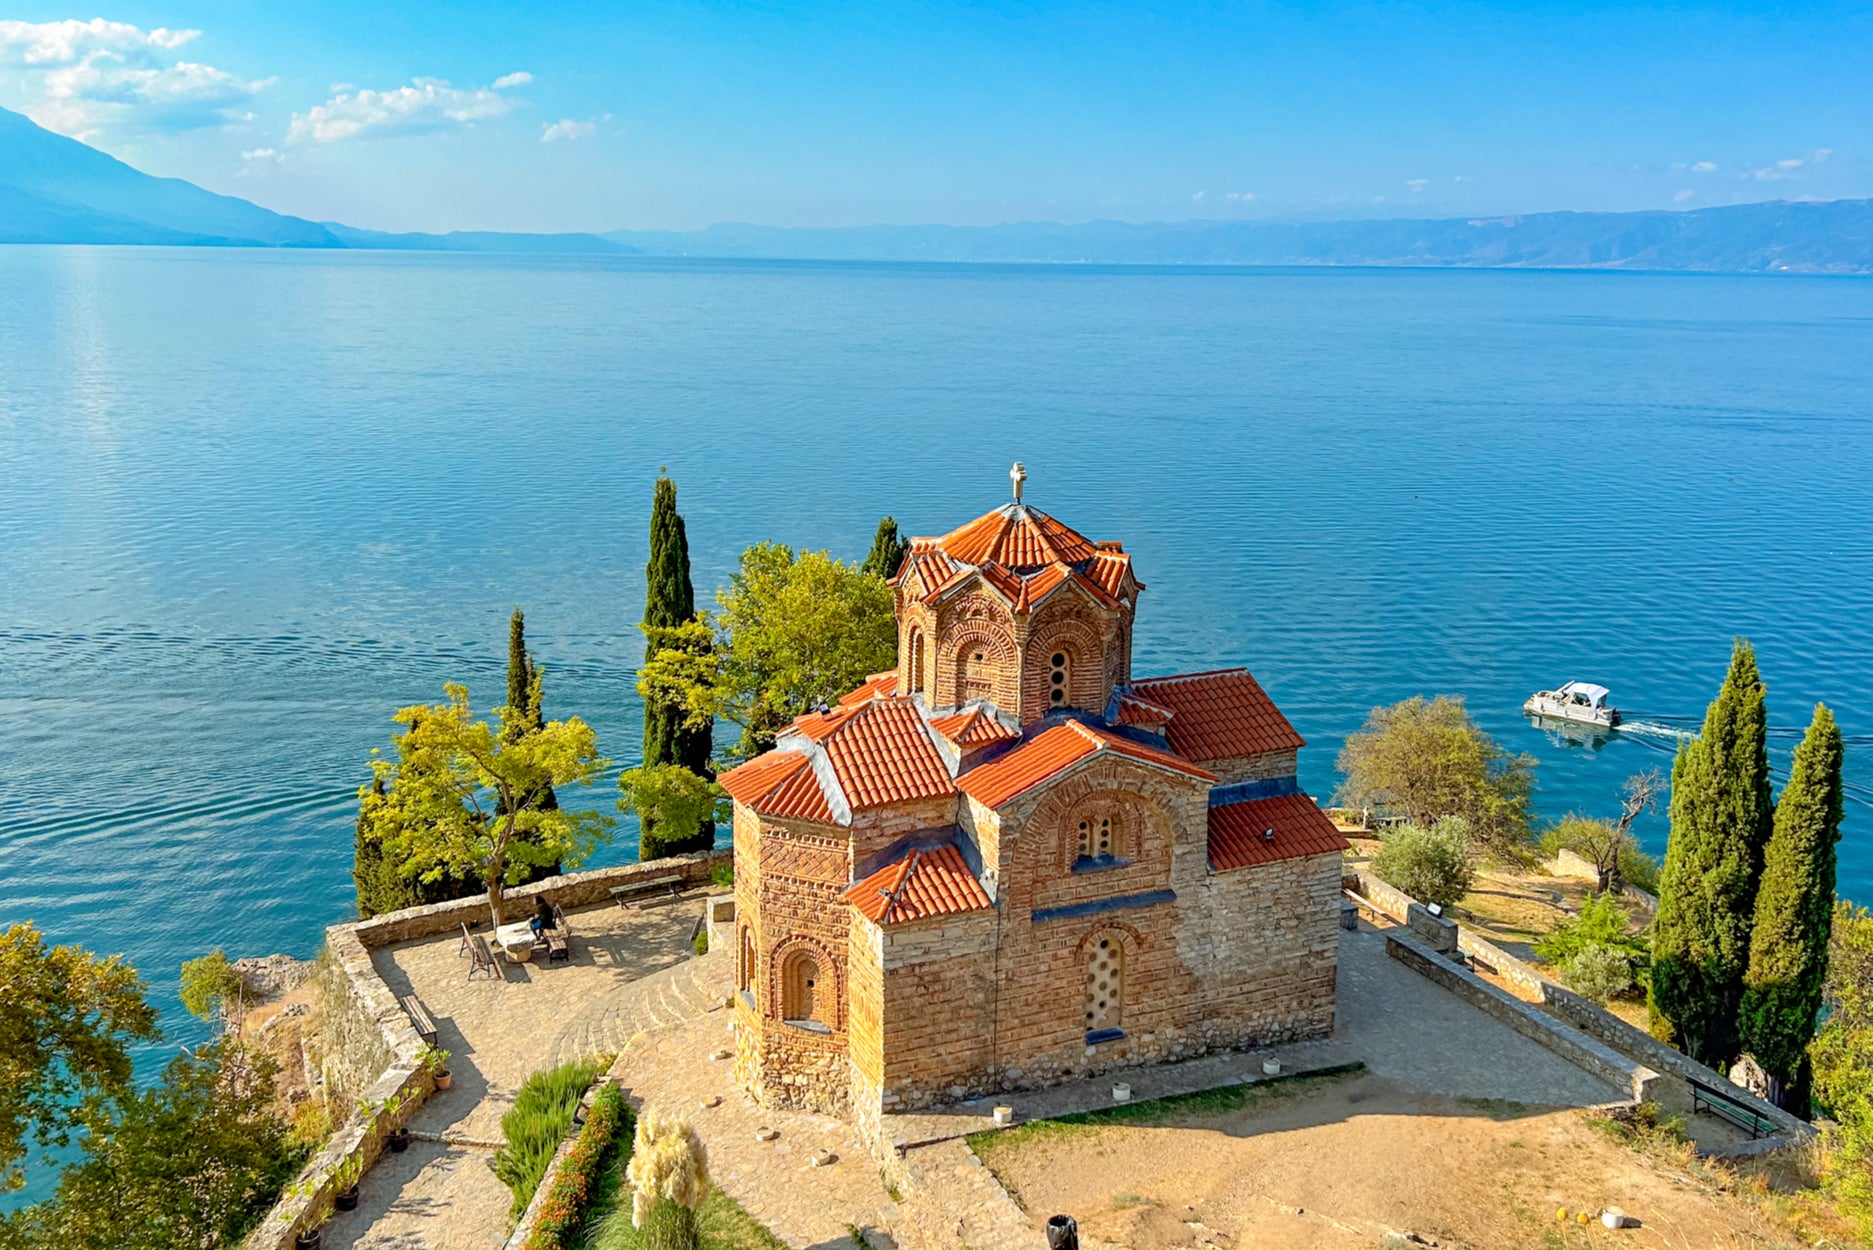 The lake is shared between North Macedonia, with 60 per cent of shoreline, and Albania